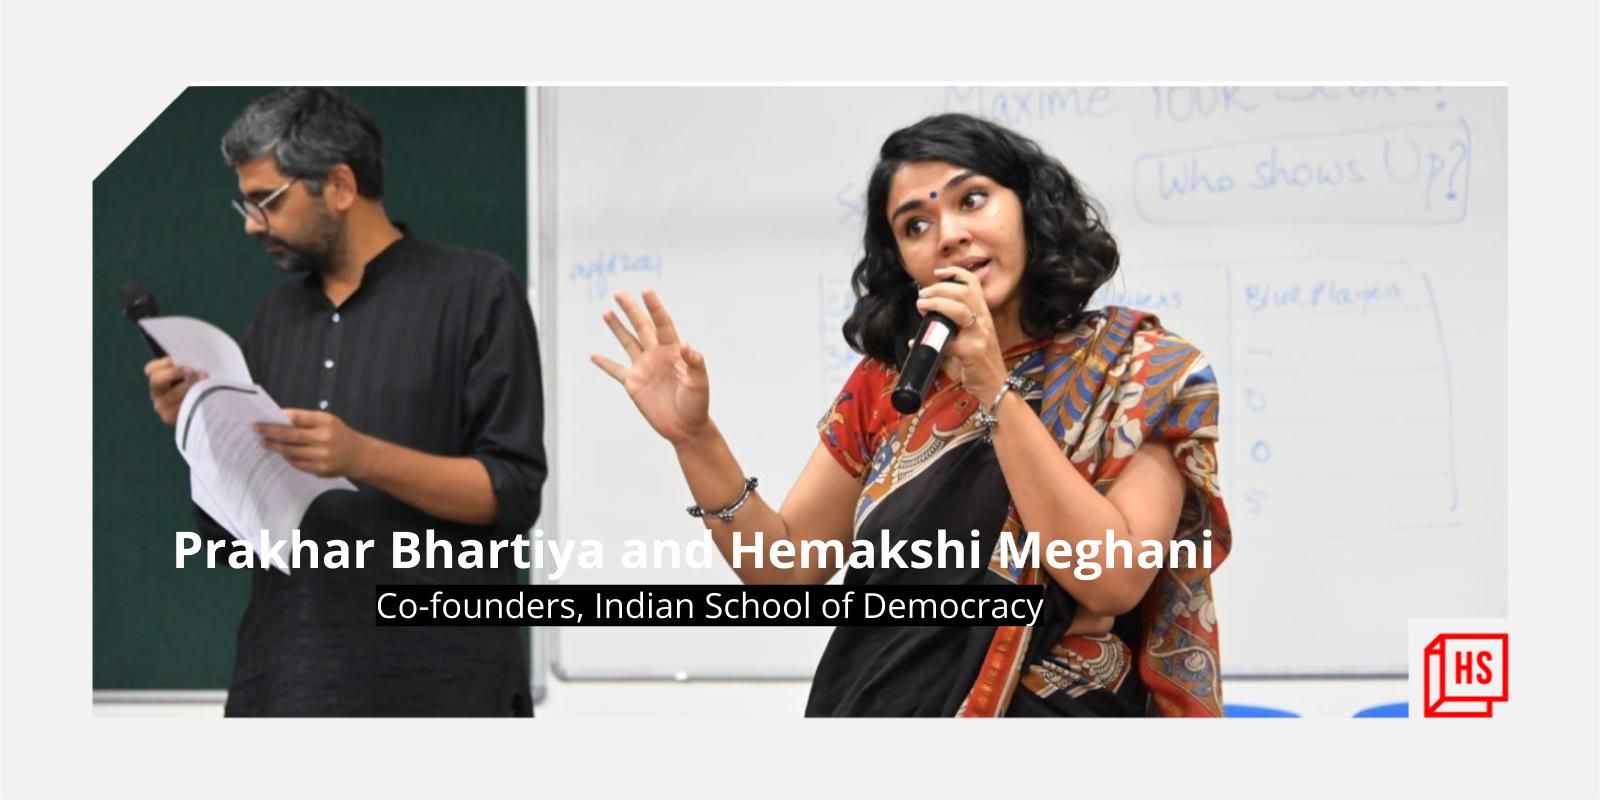 Meet this social entrepreneur, set out to build a new-gen of political leaders in India